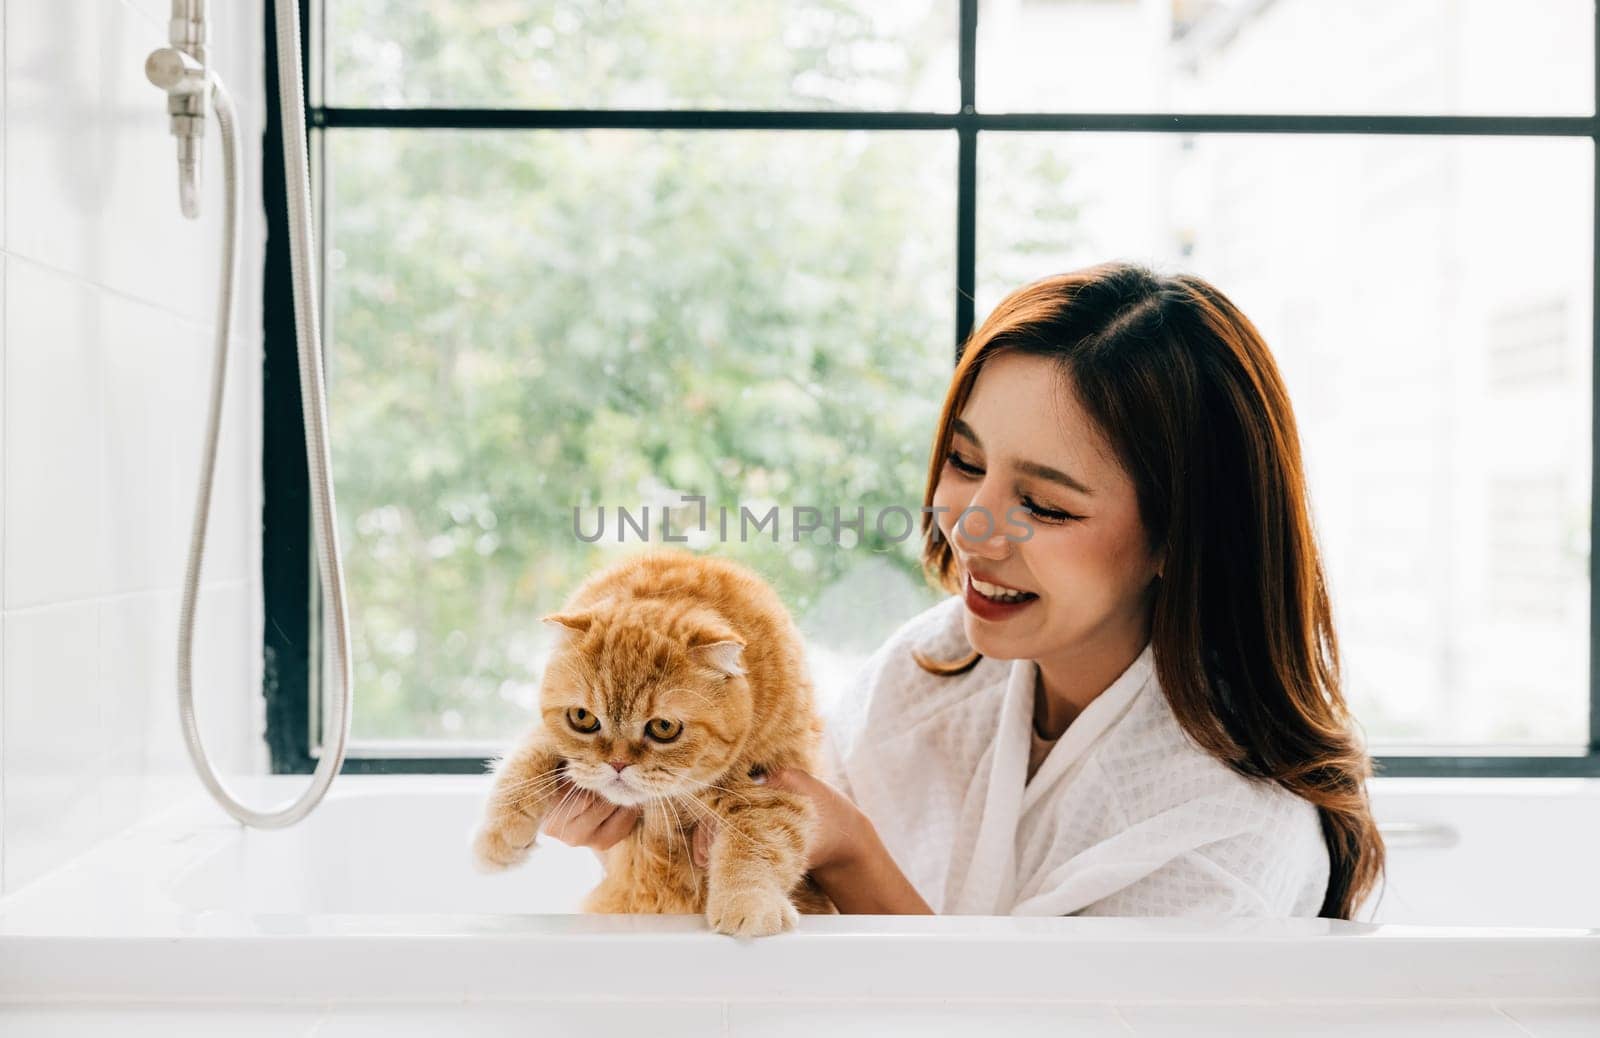 Indulging in a spa-like bath, a smiling woman shares a bathtub with her Scottish Fold cat, a heartwarming scene of relaxation and pet care. by Sorapop